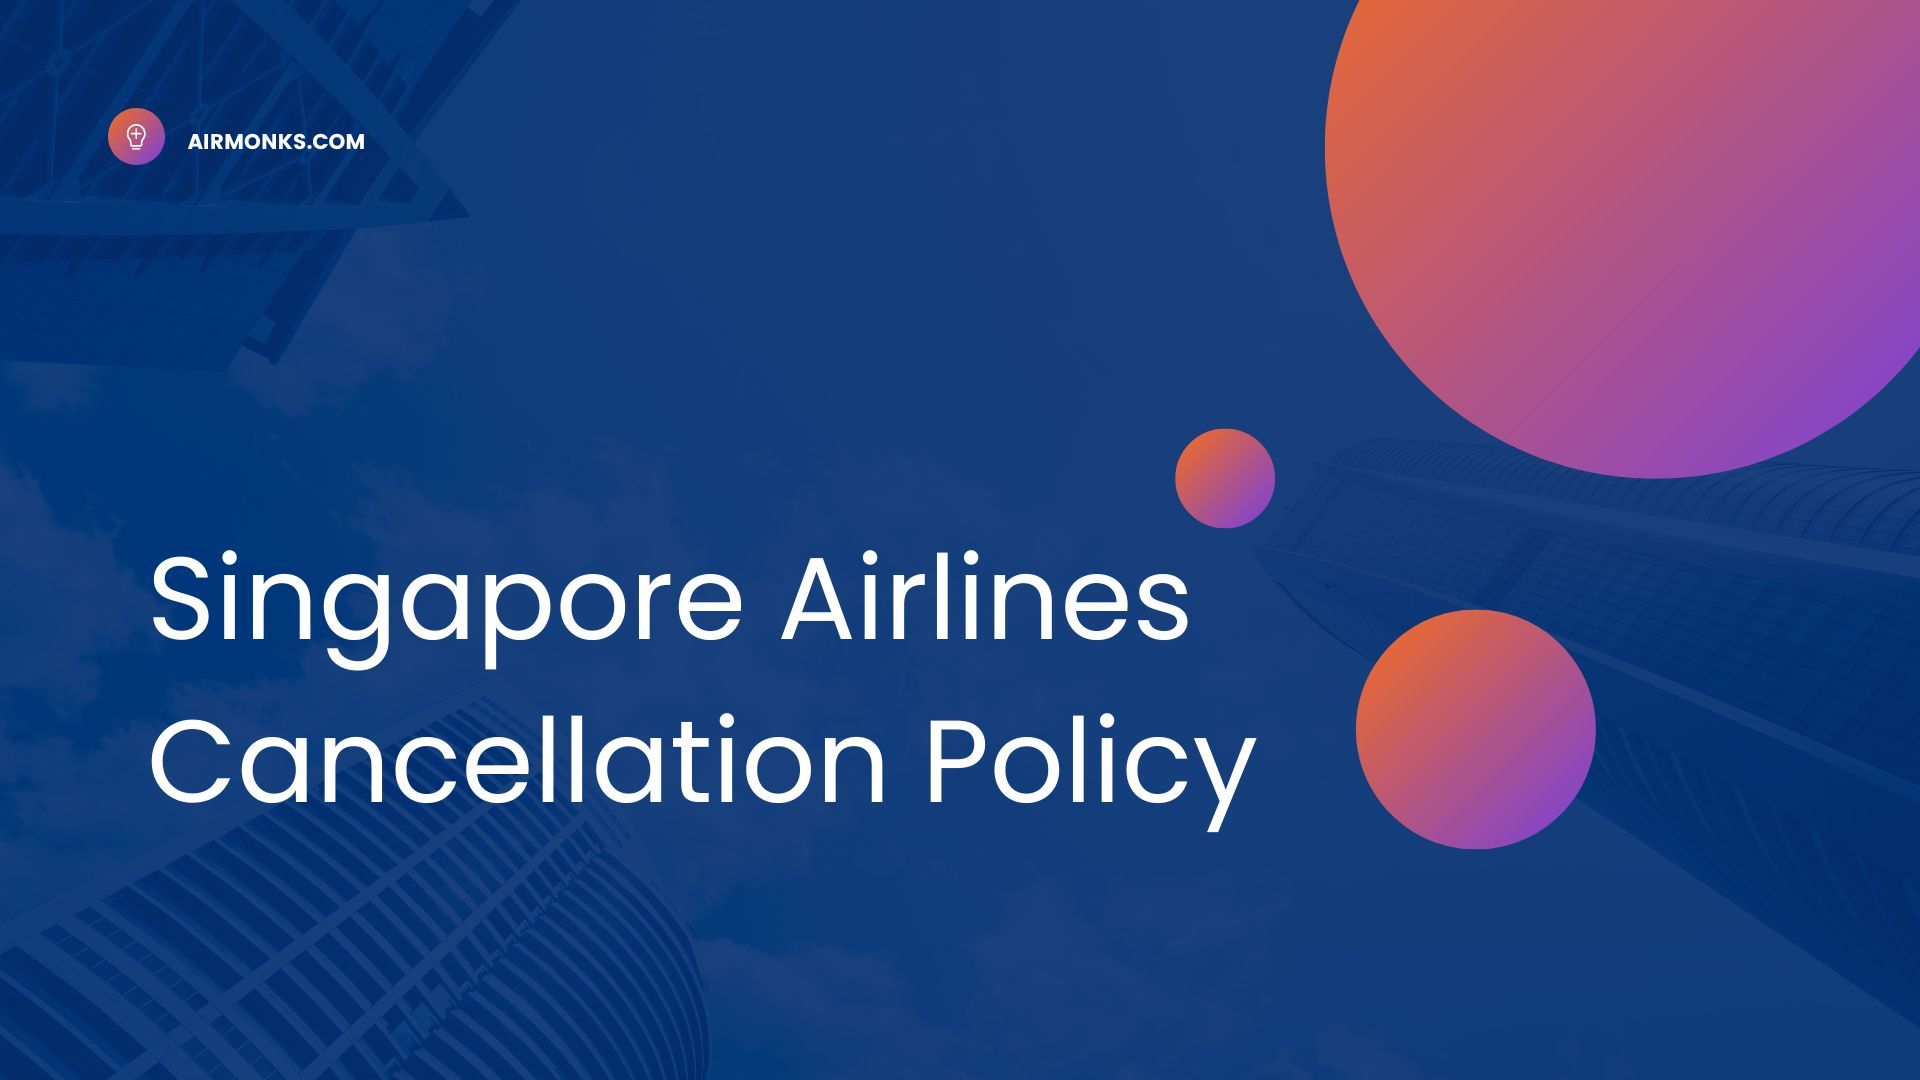 Singapore Airlines Cancellation Policy63f48b17a6dc6.jpg